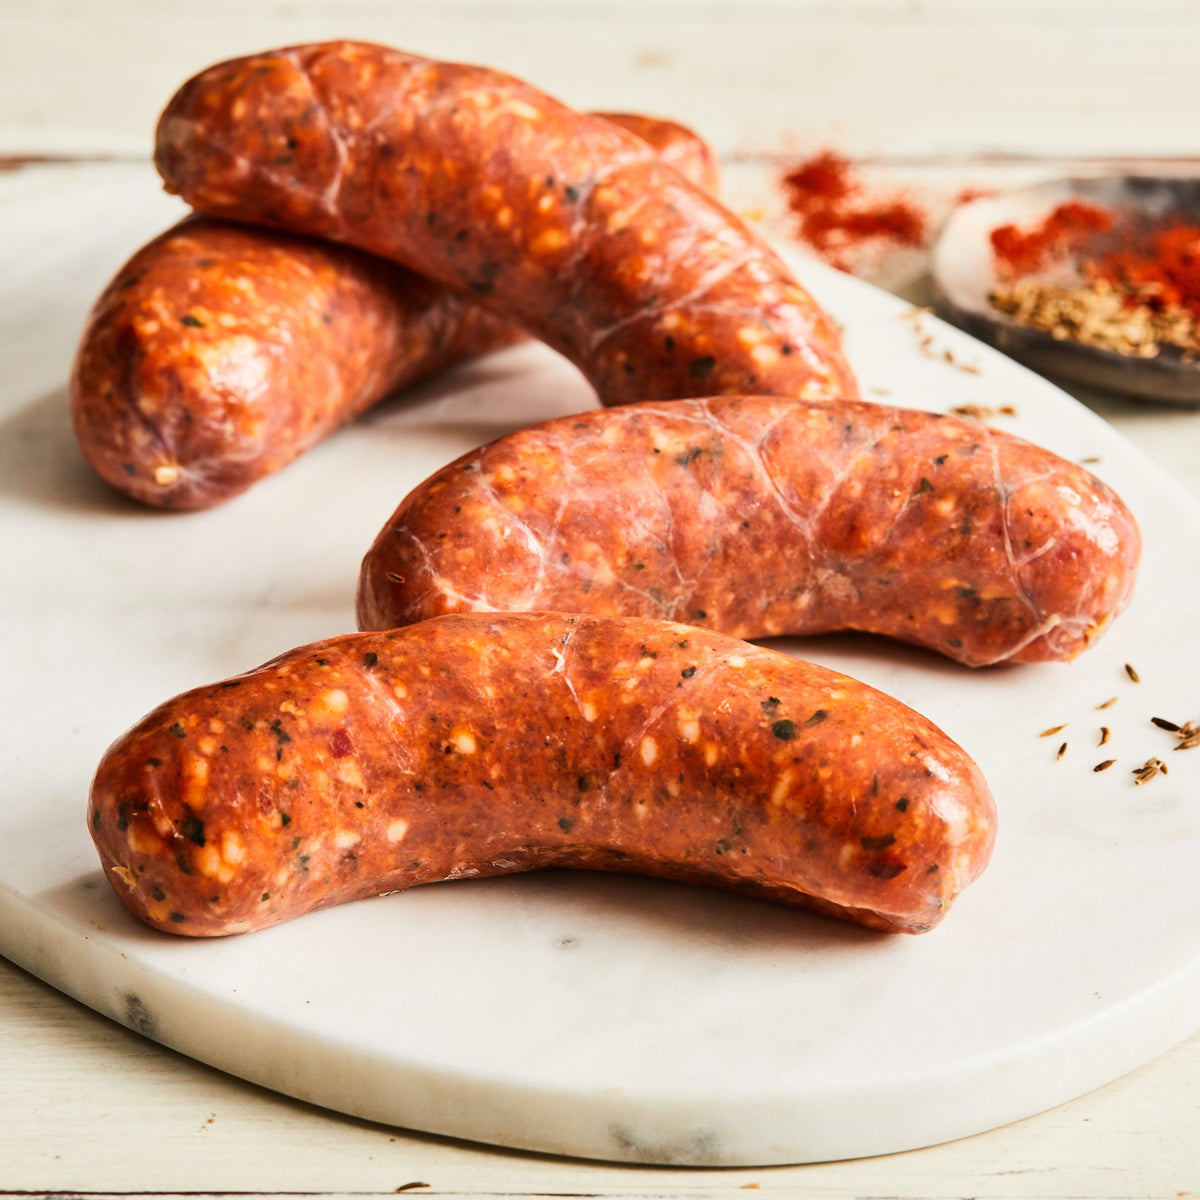 Image of California Chicken Chorizo. 4 links, about 1 lb. this uncooked California-style sausage is a blend of chicken and pork seasoned with red pepper puree and a variety of spices